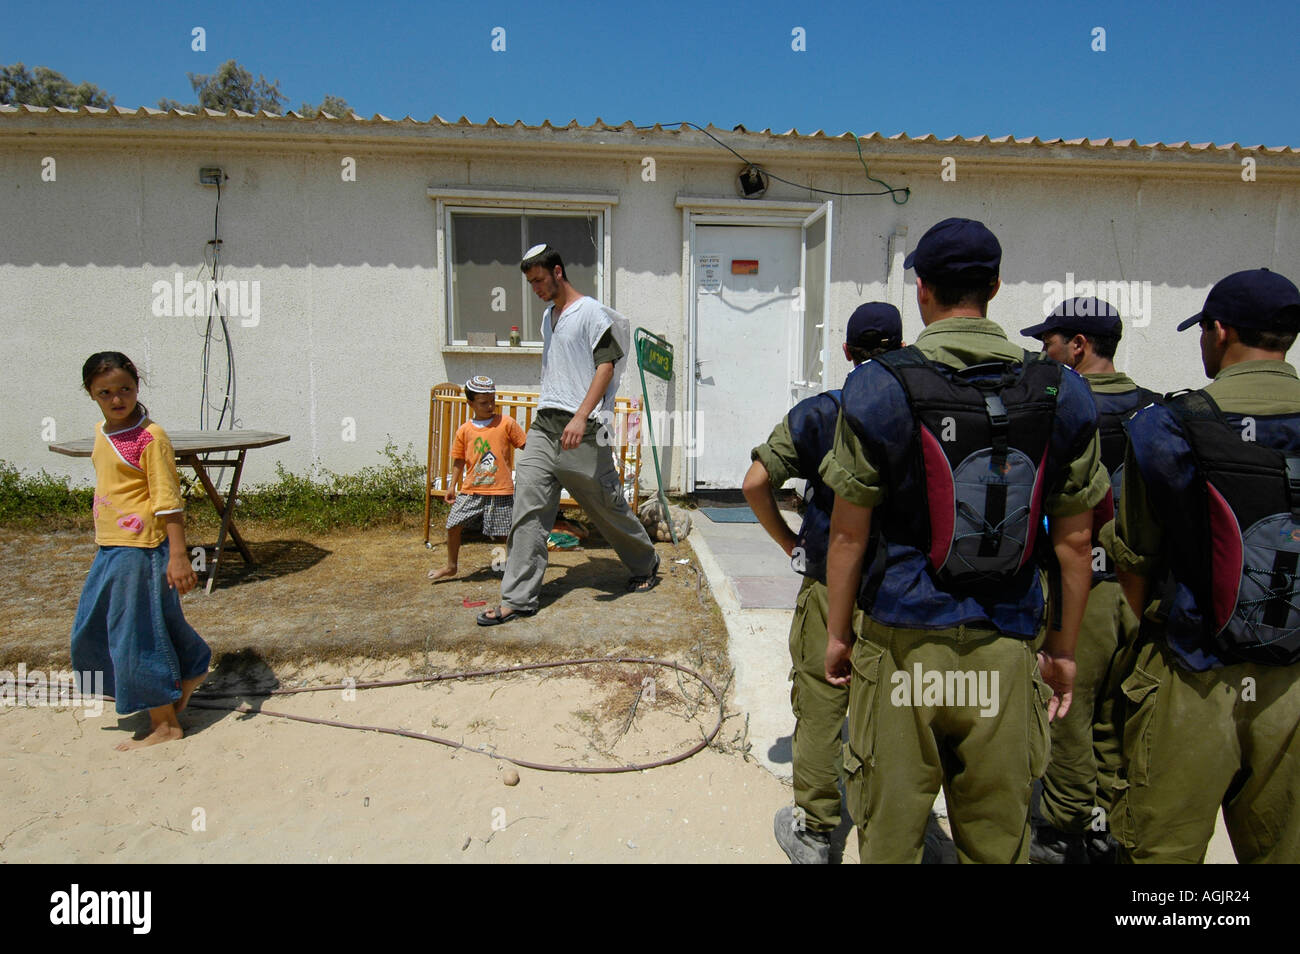 Israeli soldiers watch Jewish settlers leaving their home in Tel Katifa settlement as part of the Israeli disengagement from Gaza strip Stock Photo